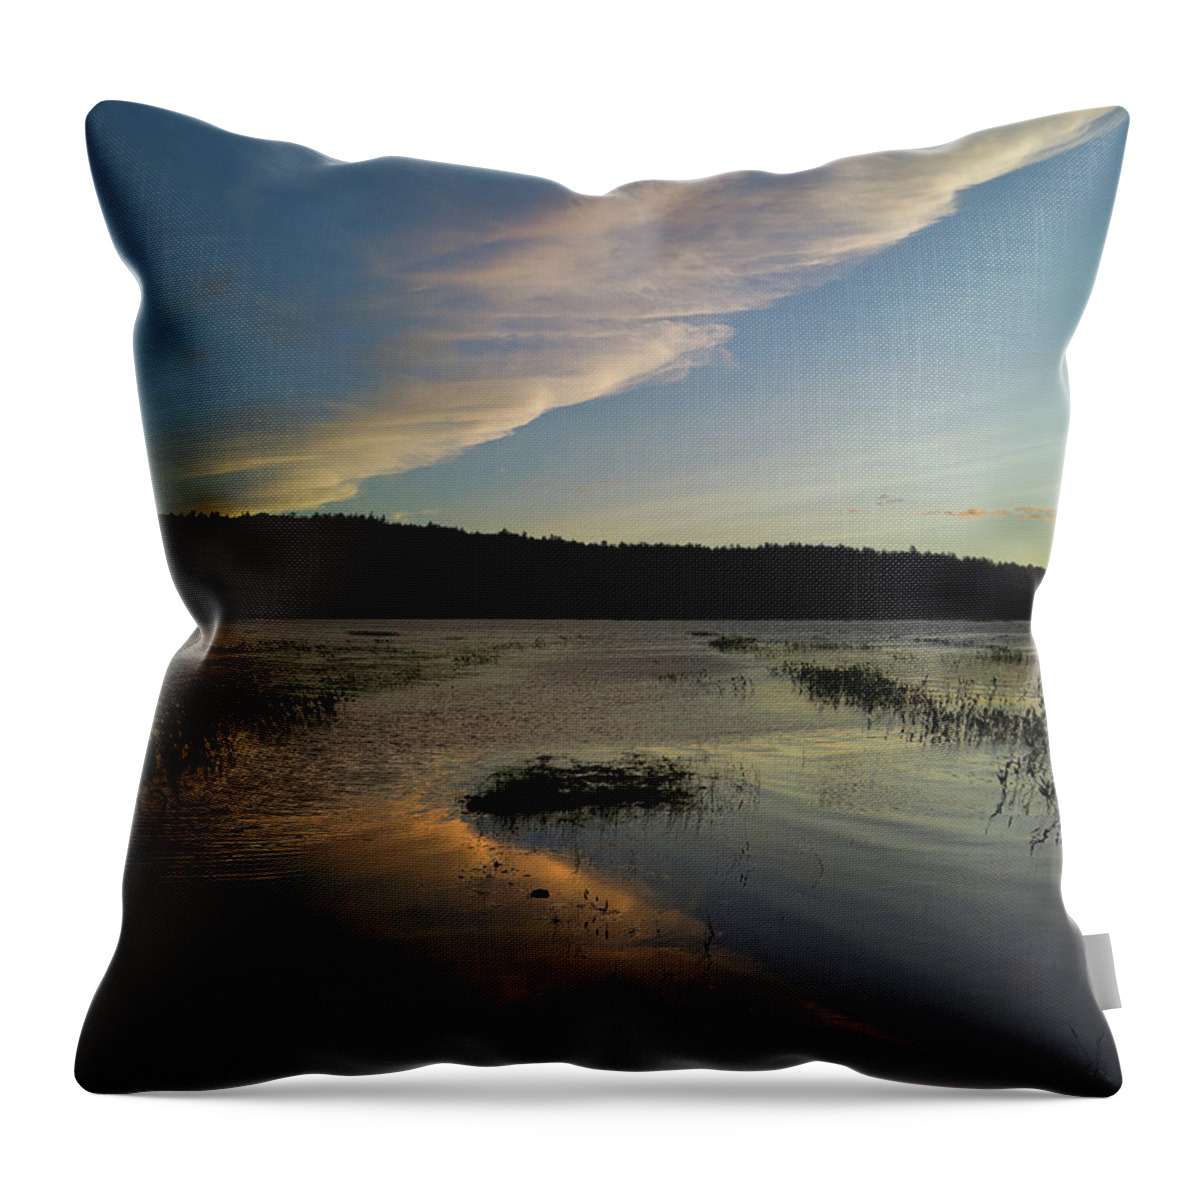 Clouds Throw Pillow featuring the painting Evening Flight by Jerry LoFaro